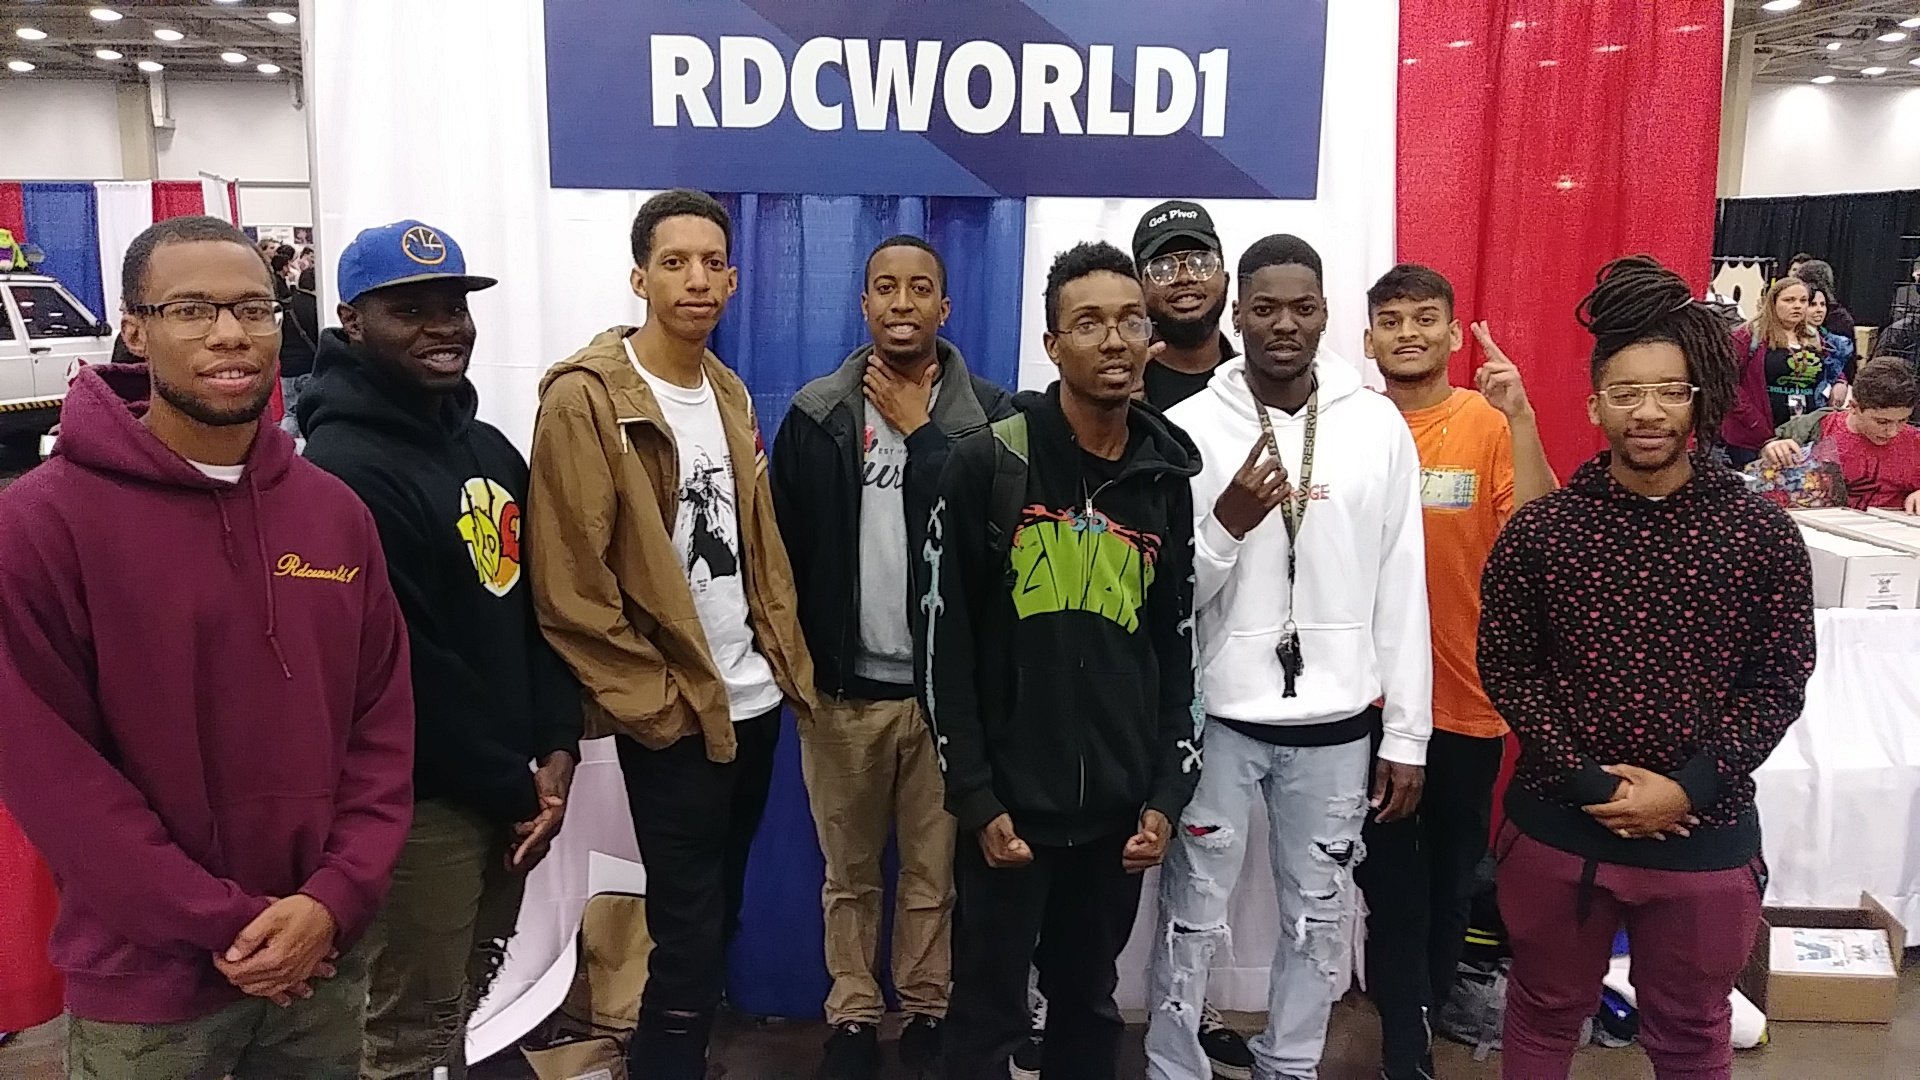 Marcus Bryant to meet the guys from rdcworld1 at DallasFanExpo and it was surreal af